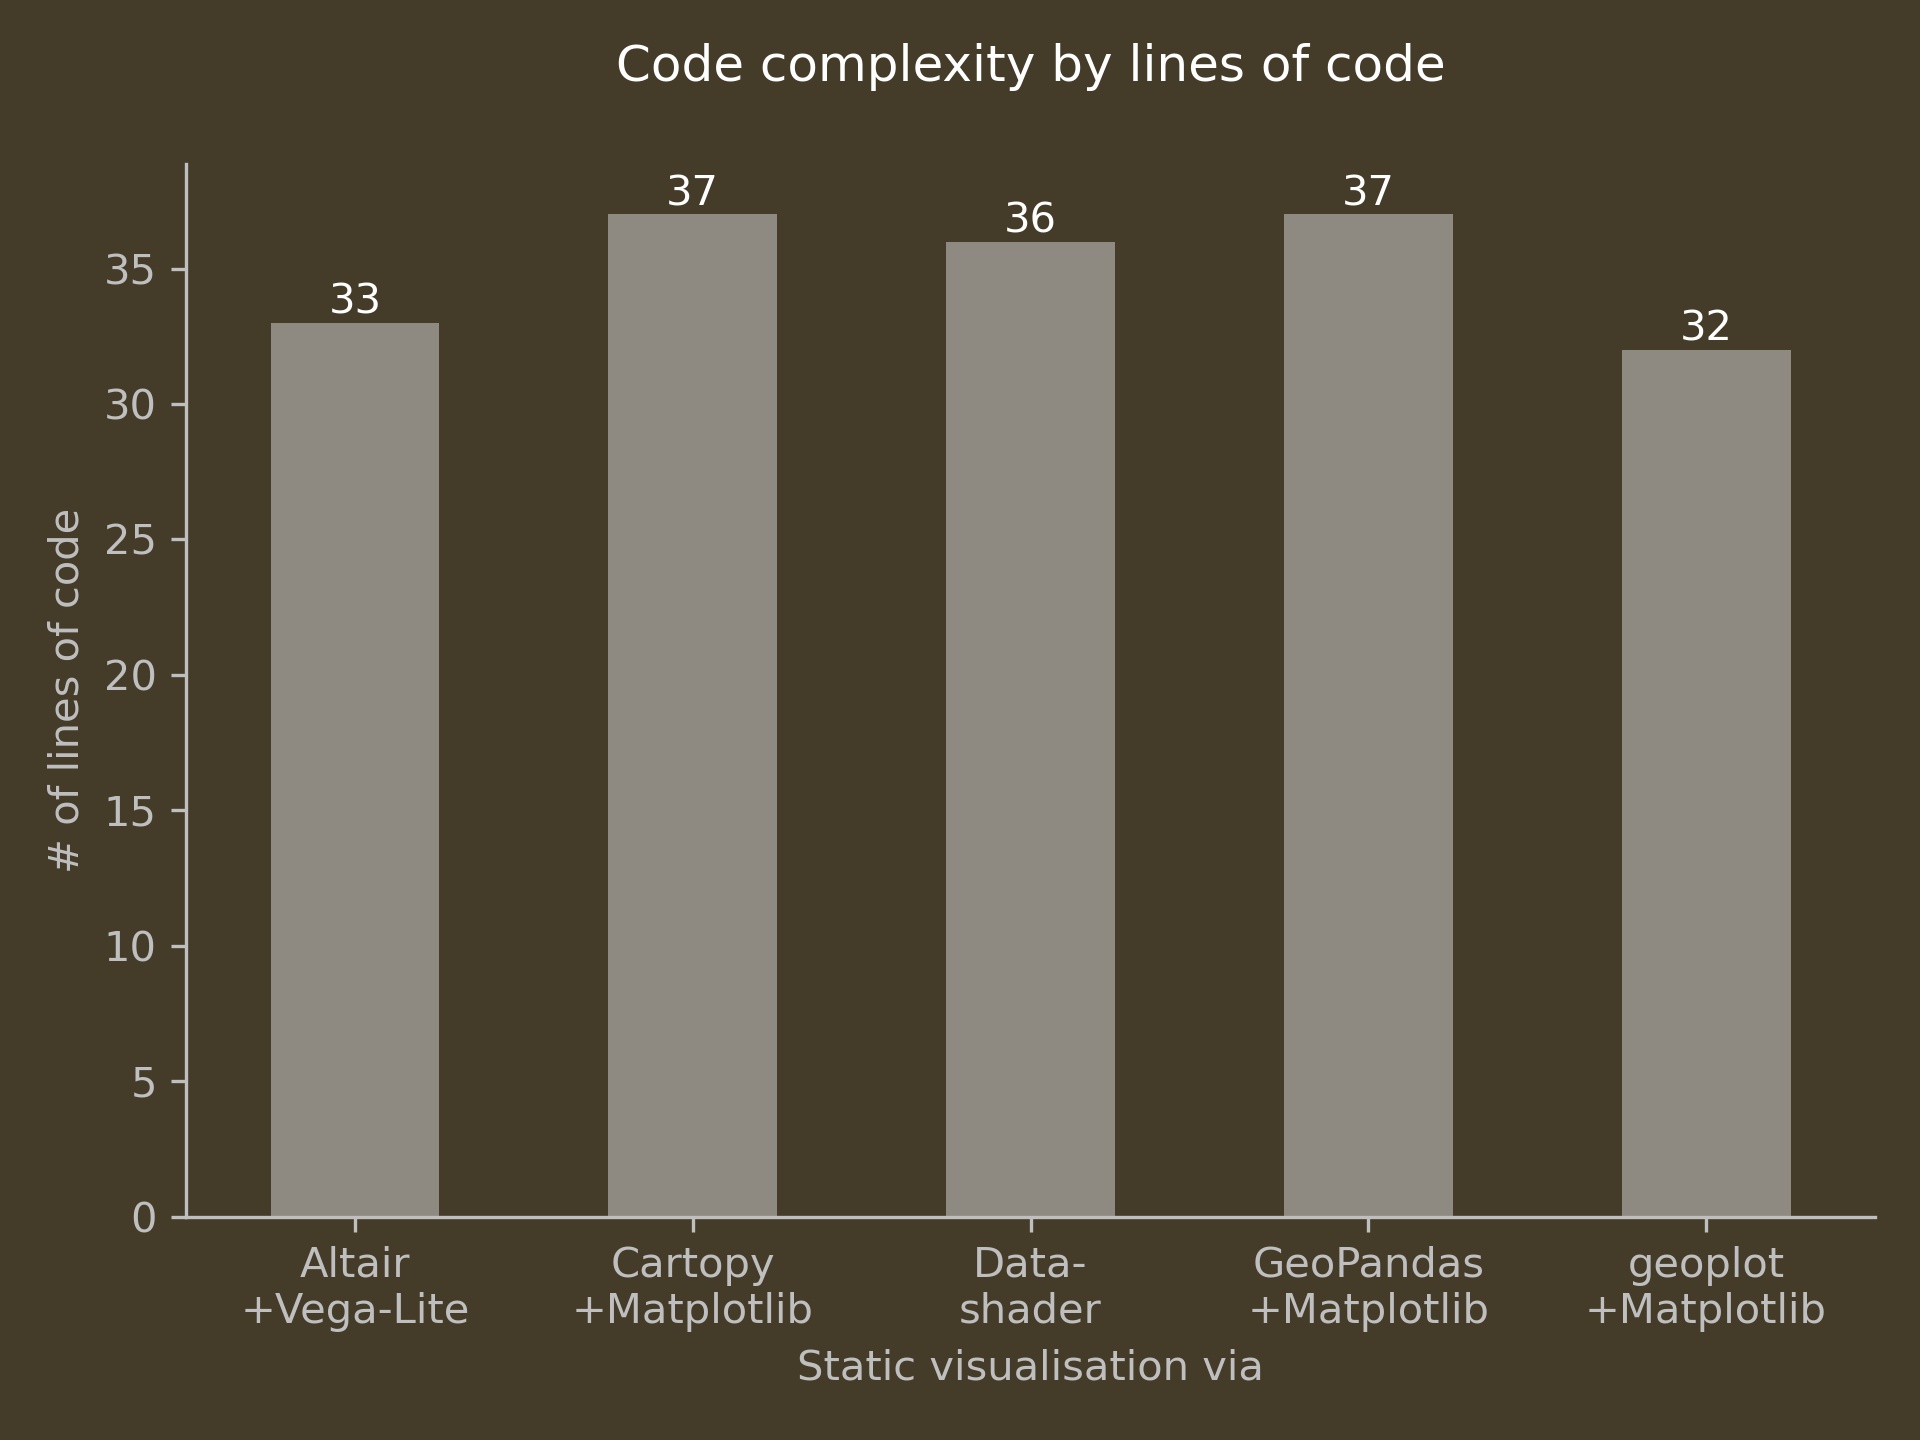 Lines of code comparison for static visualisations in Python